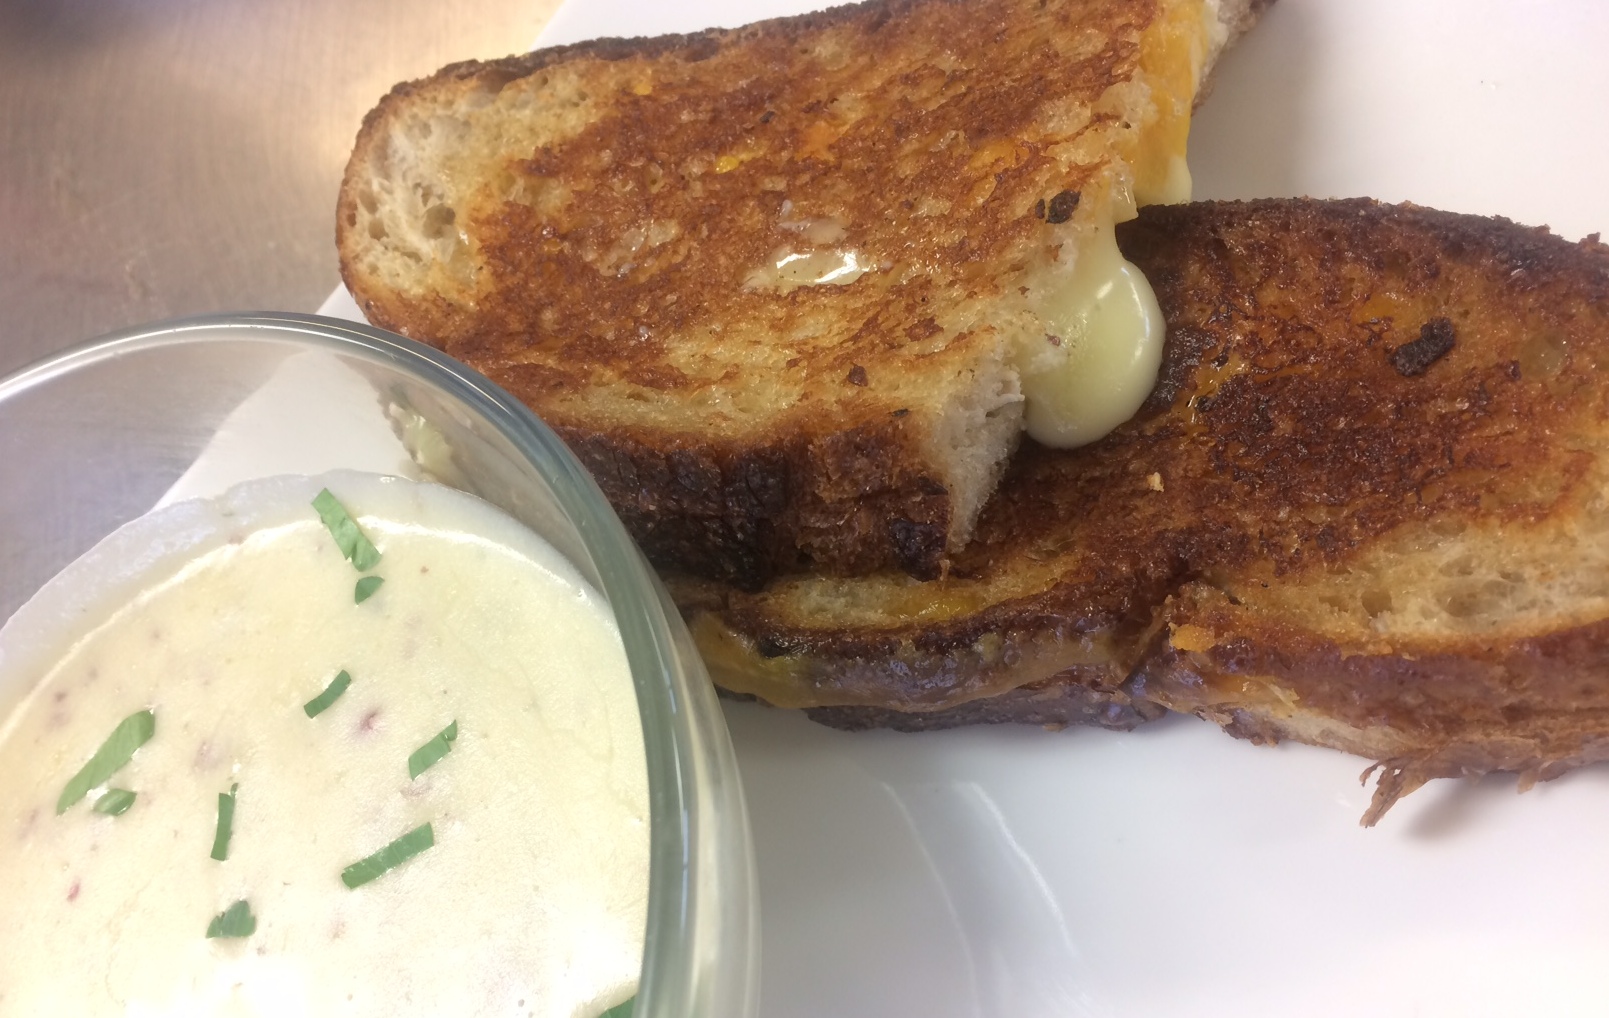 Homemade Creamy Potato Soup with Grilled Cheese Sandwich